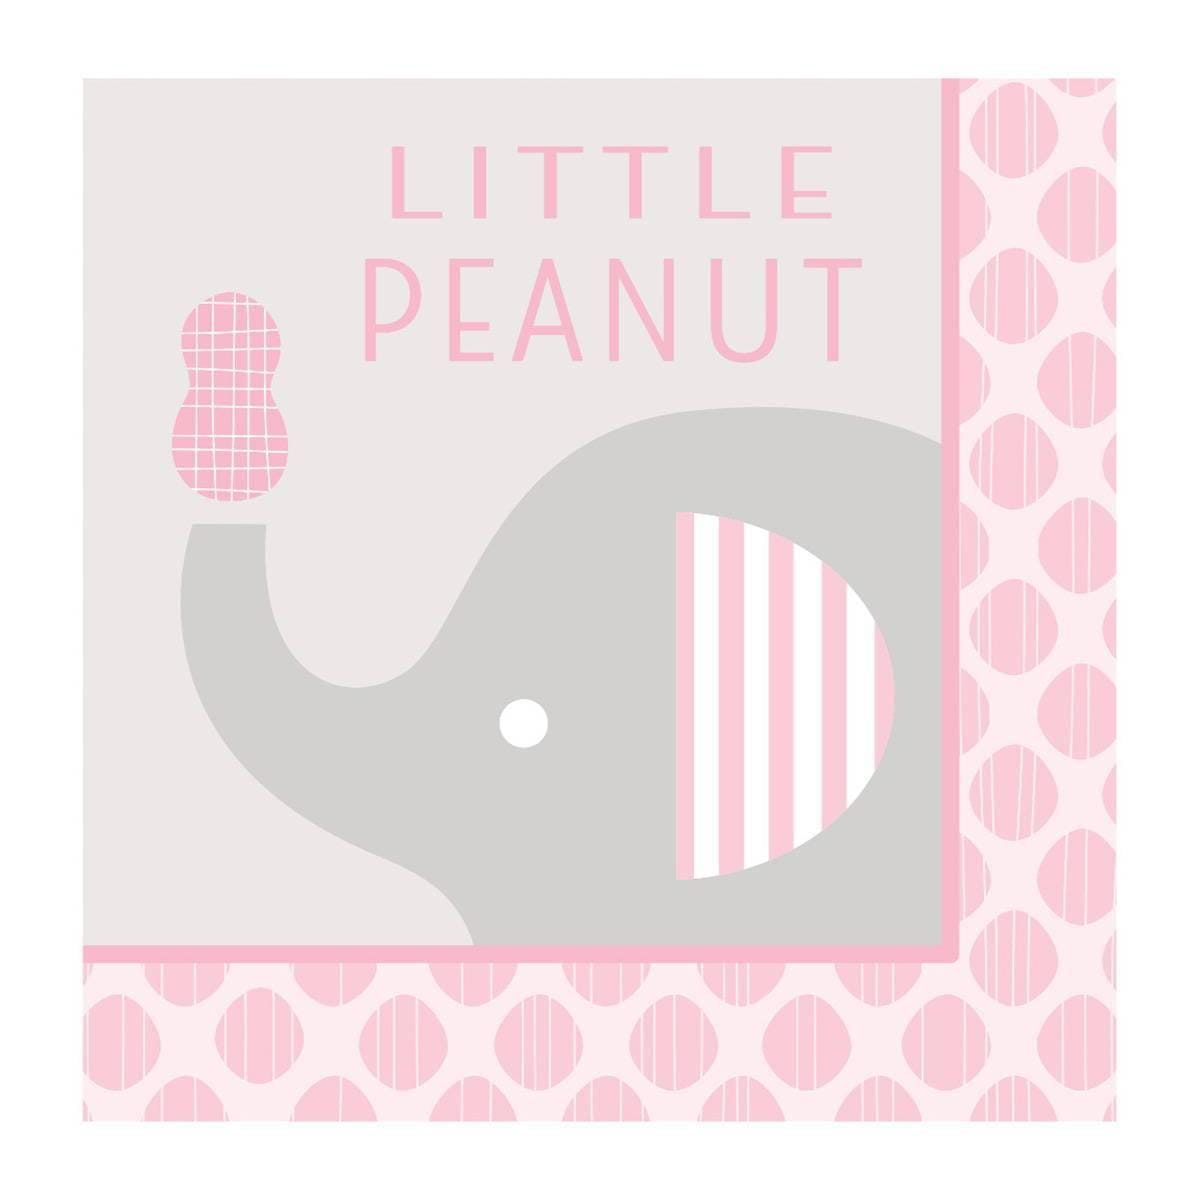 Buy Baby Shower Little Peanut Pink lunch napkins, 16 per package sold at Party Expert